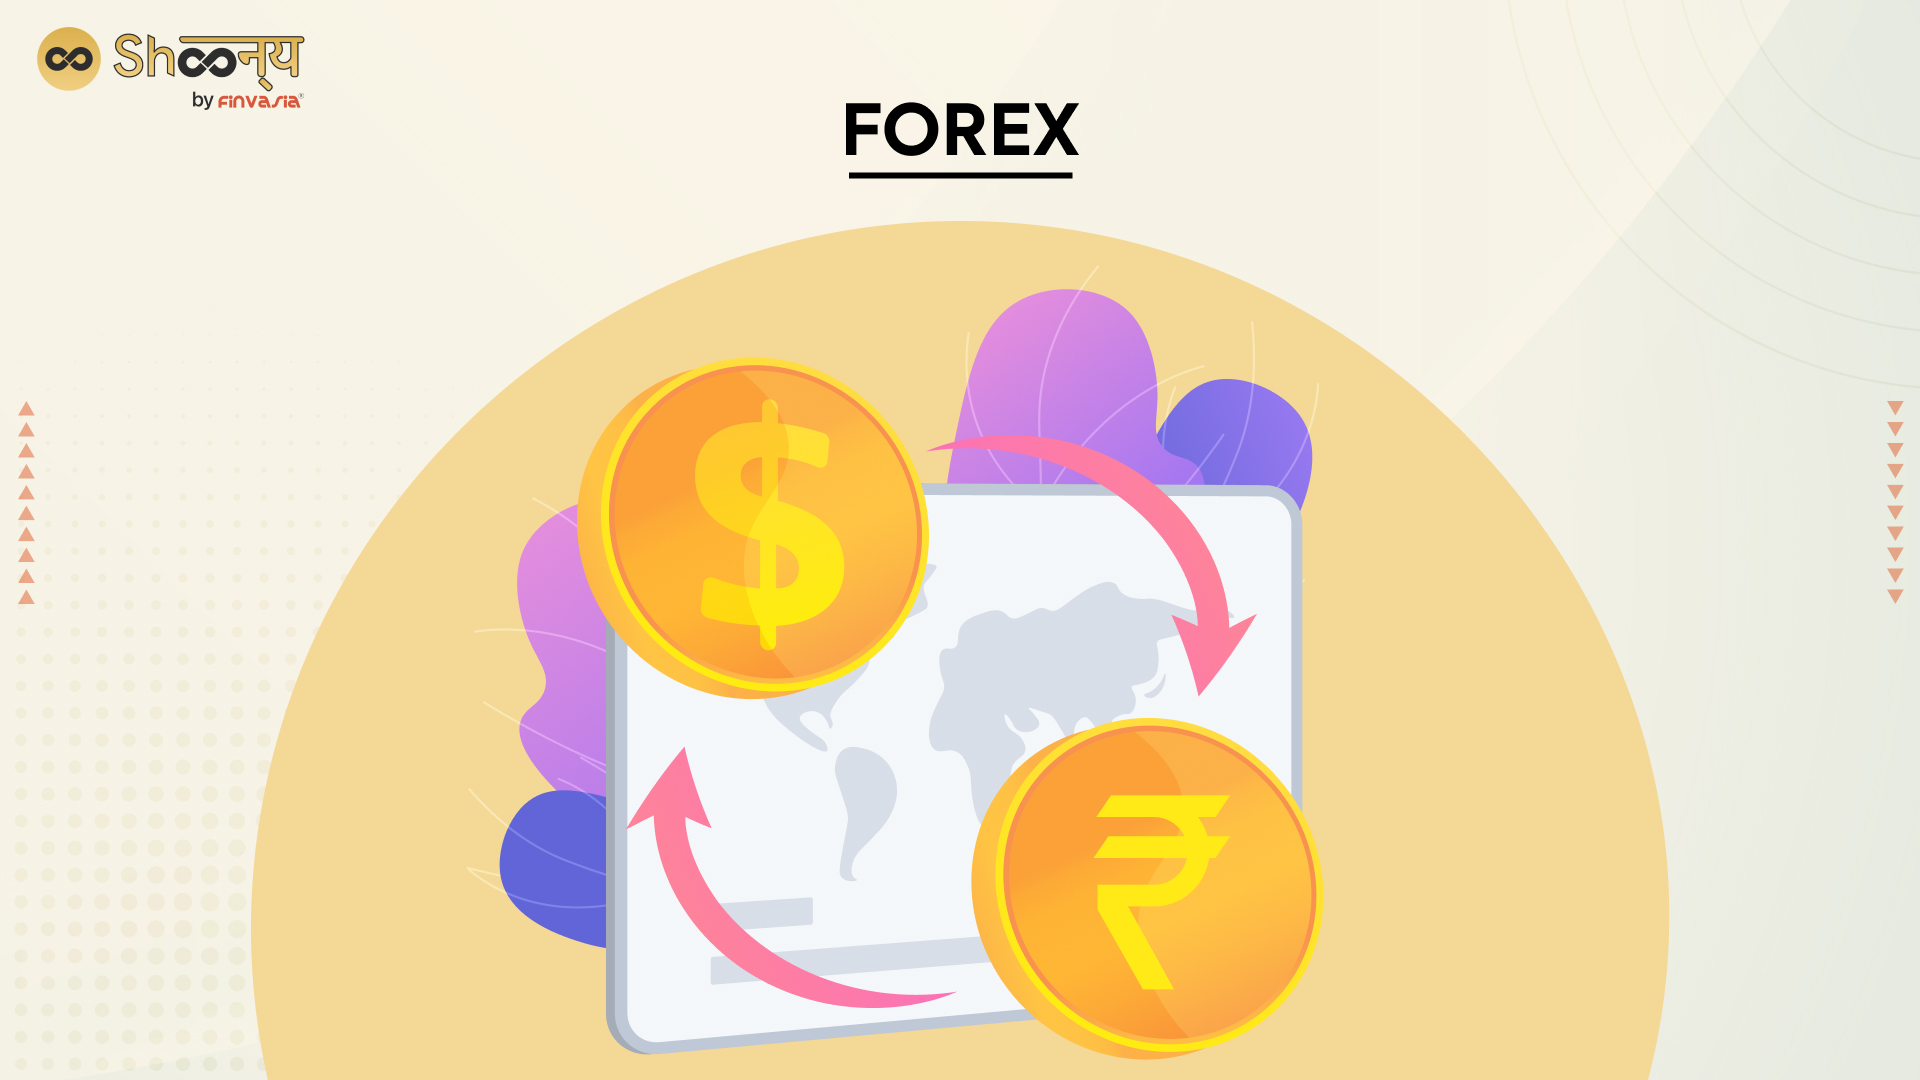 Forex - foreign exchange market where currencies are traded